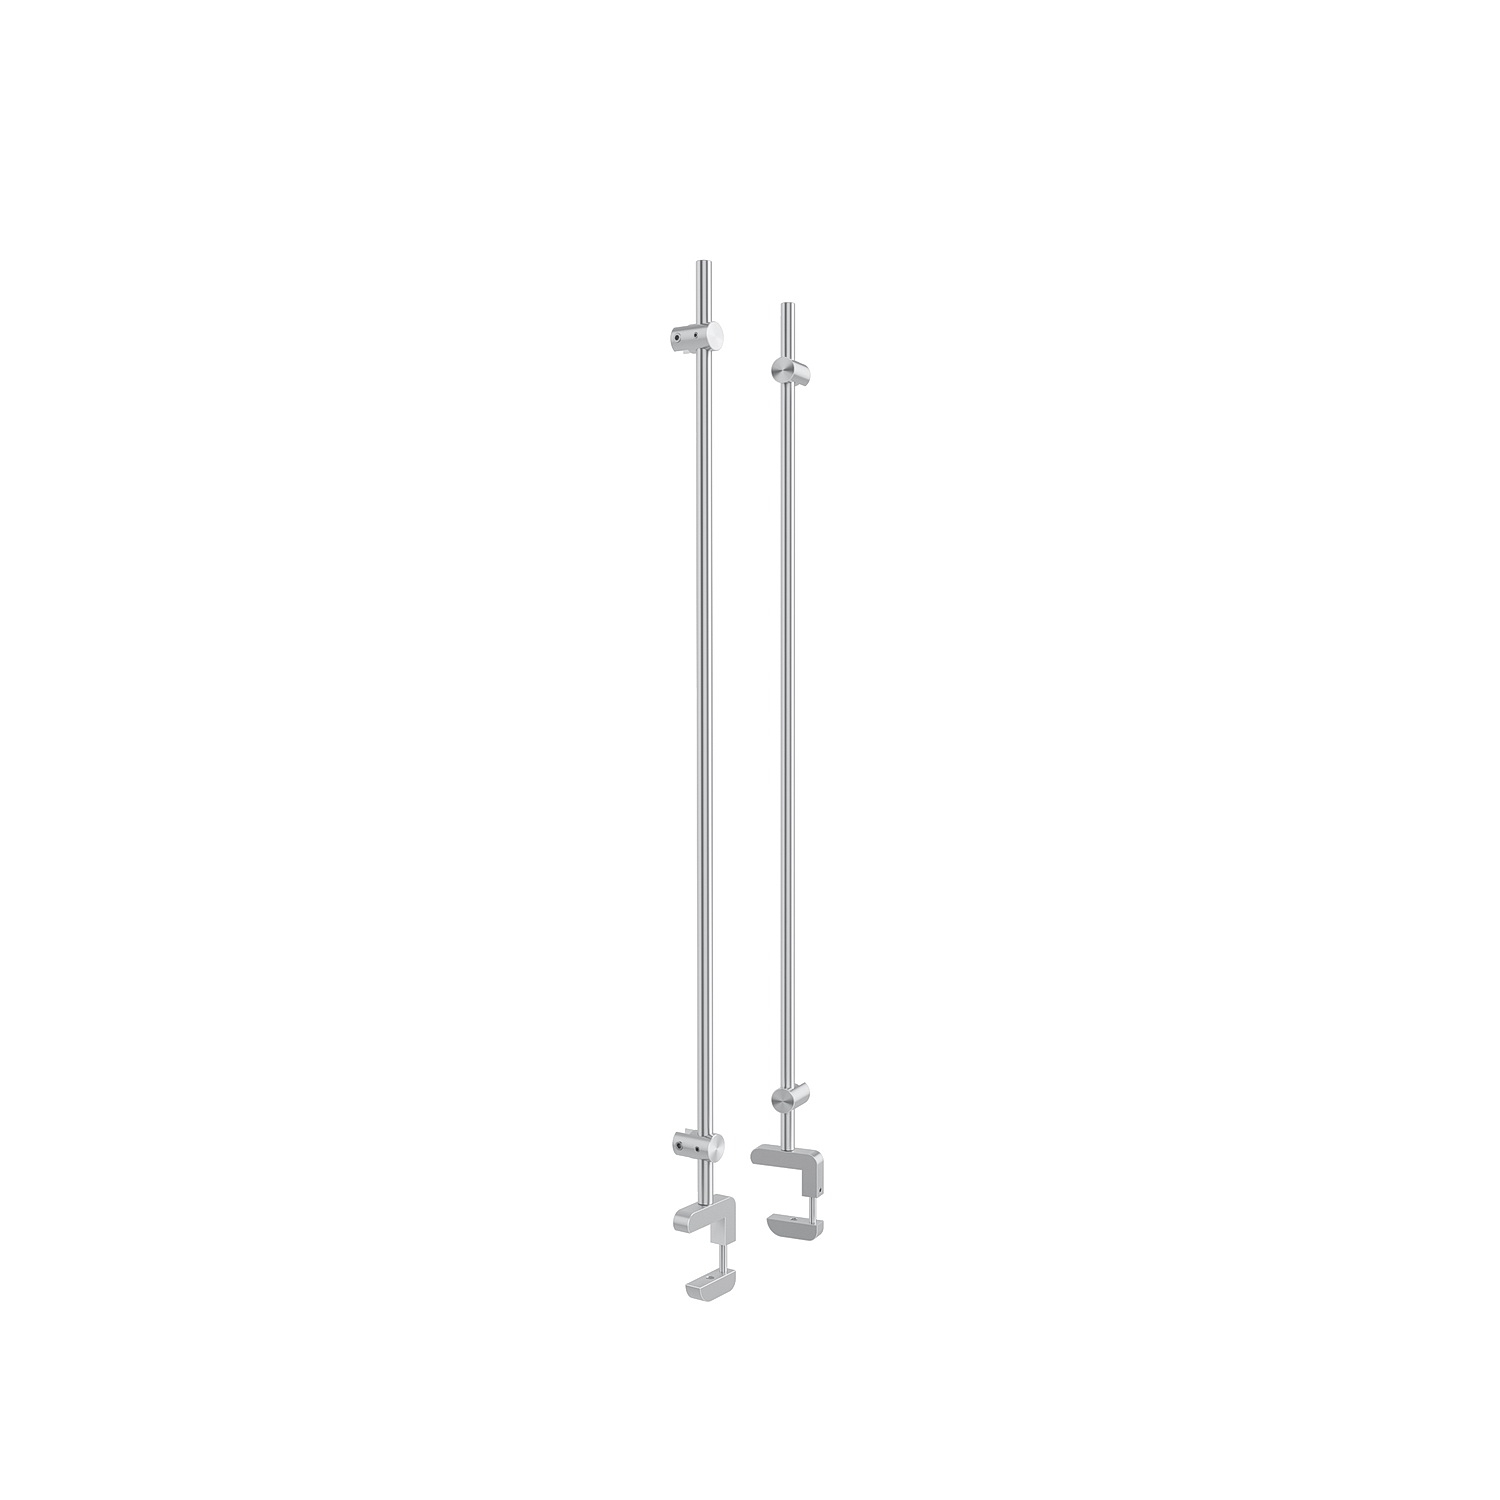 Set of 2, 3/8'' Diameter Vertical Rod Mount, Aluminum Clear Anodized Finish, 24'' Long w/ Adjustable Clamp to Accomodate 3/4'' to 1-1/2'' Counters. Hold up to 5/16'' material thickness